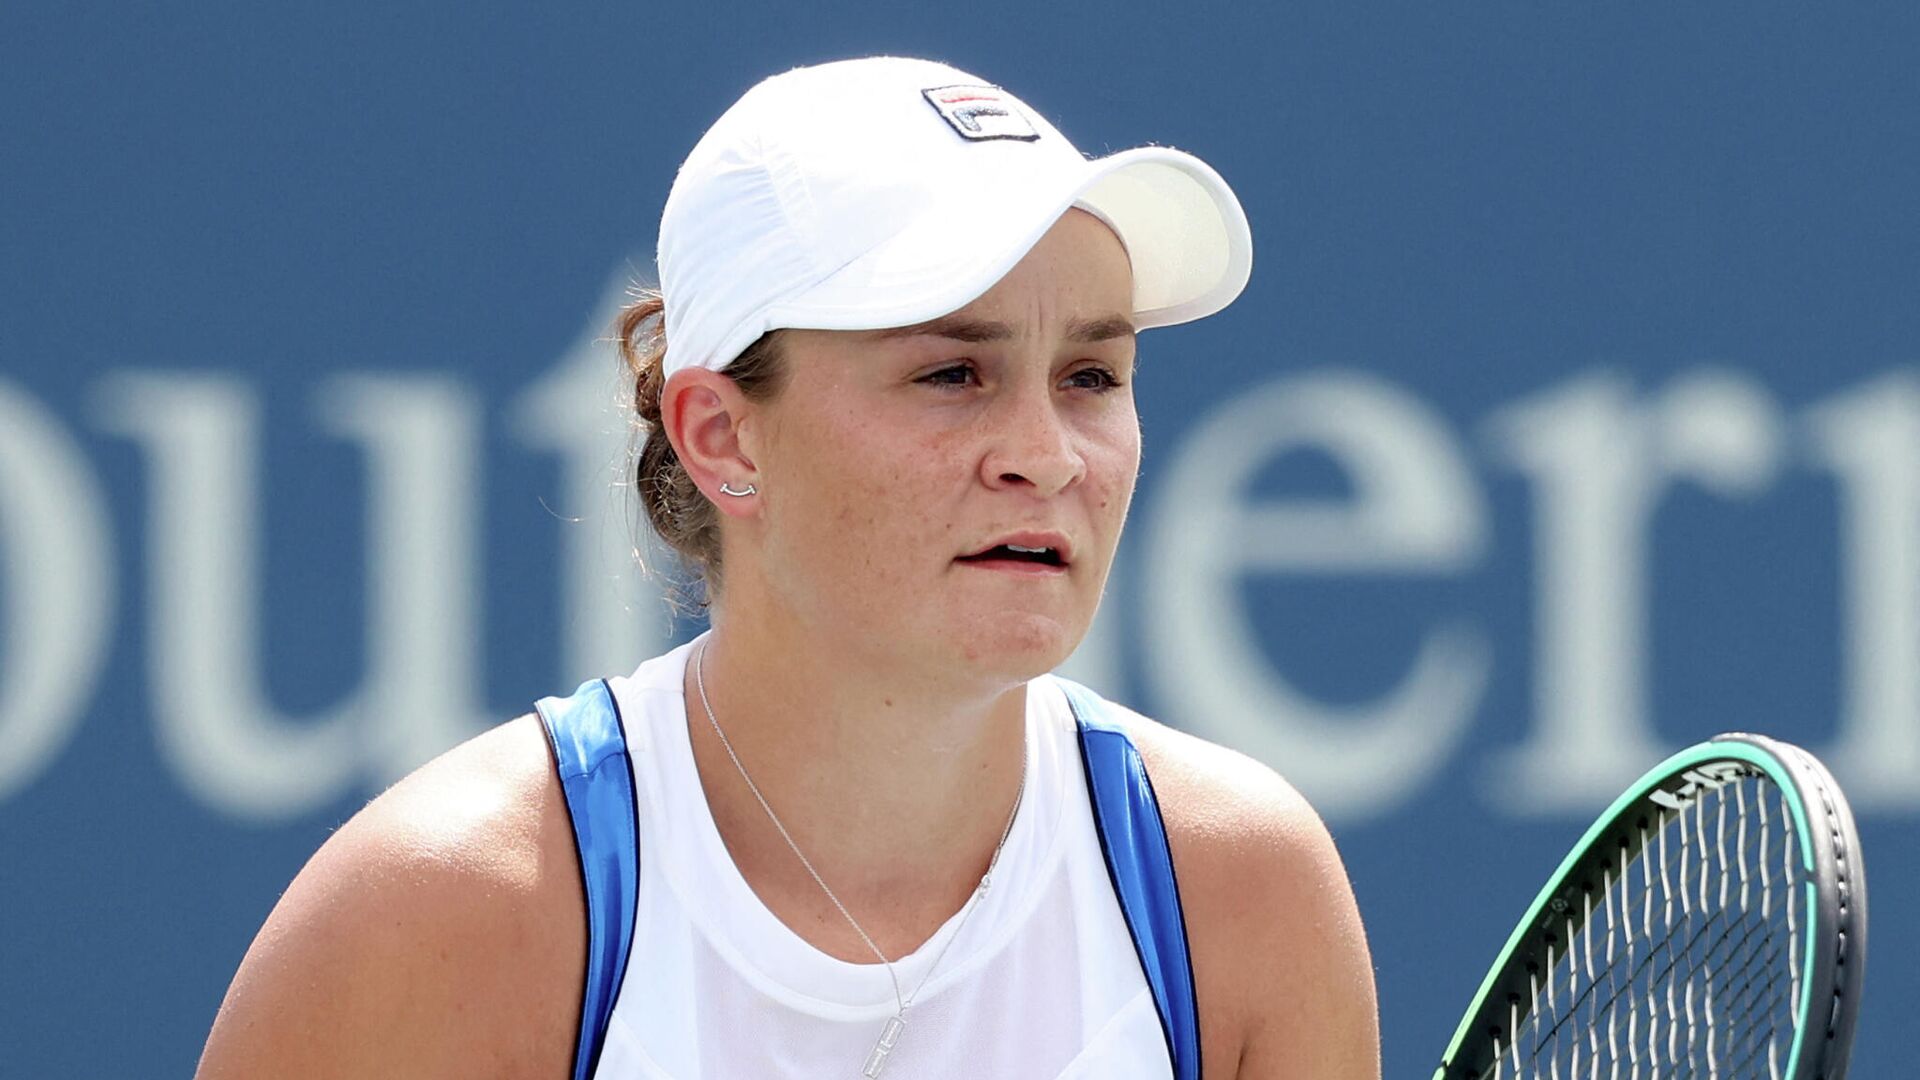 MASON, OHIO - AUGUST 18: Ashleigh Barty of Australia plays Heather Watson of Great Britain during the Western & Southern Open at Lindner Family Tennis Center on August 18, 2021 in Mason, Ohio.   Matthew Stockman/Getty Images/AFP (Photo by MATTHEW STOCKMAN / GETTY IMAGES NORTH AMERICA / Getty Images via AFP) - РИА Новости, 1920, 18.08.2021